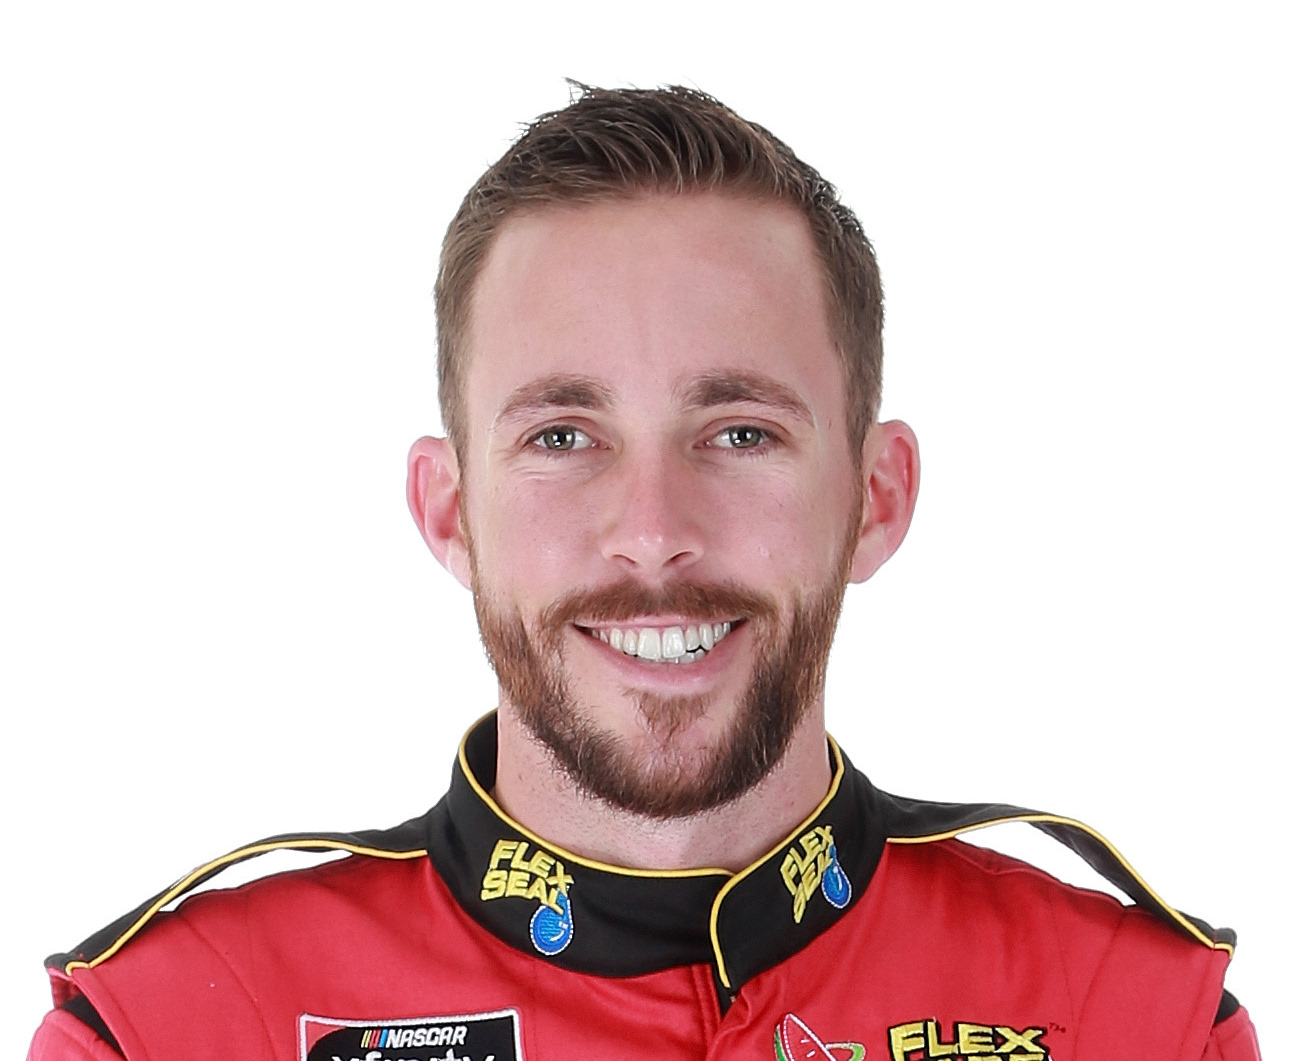 Ross Chastain, if he brings check, he certainly will drive